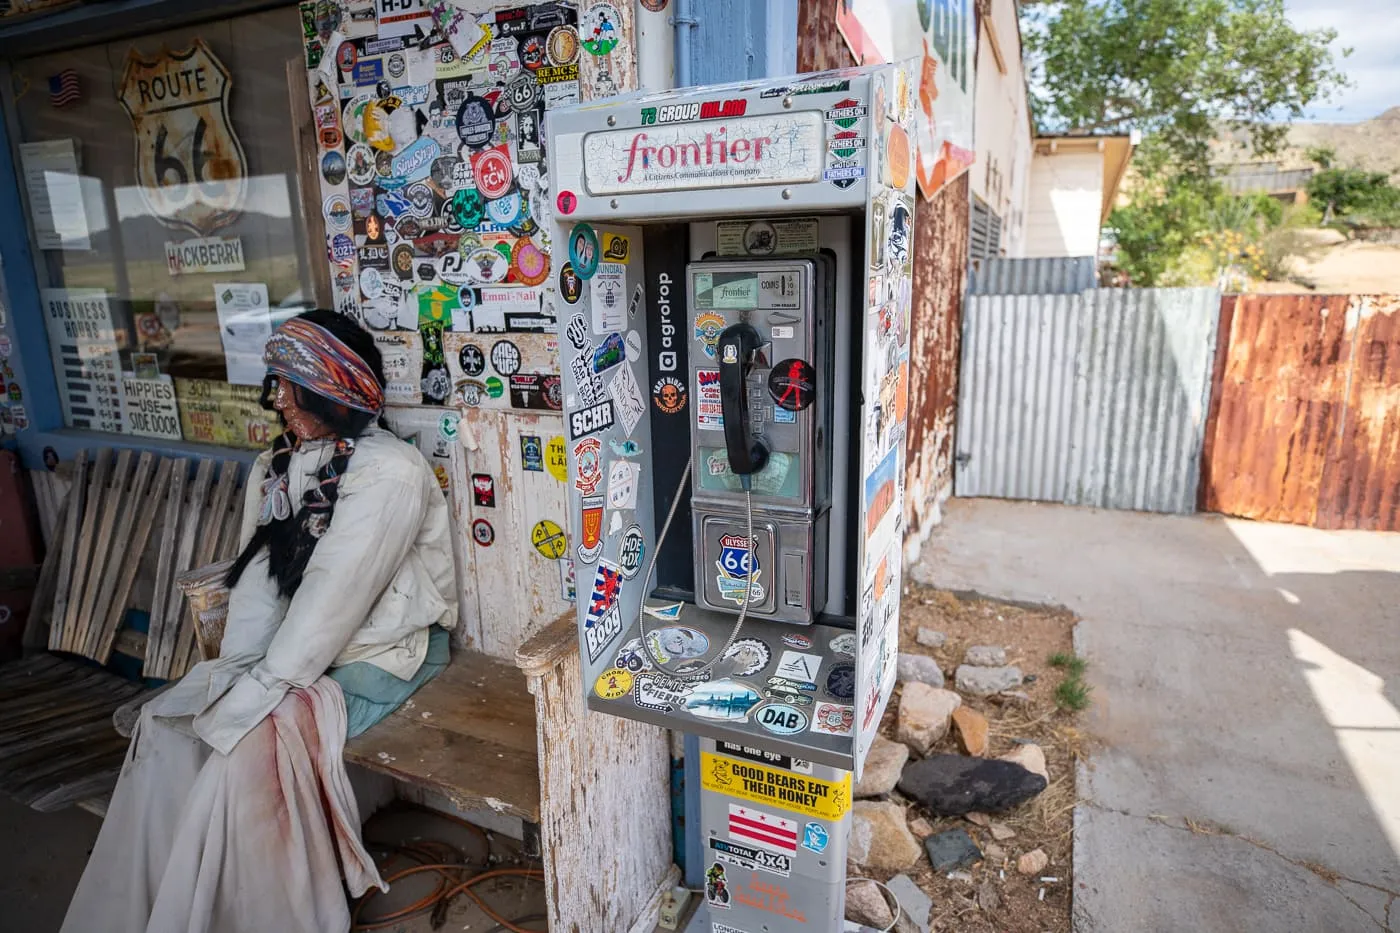 Payphone at Hackberry General Store in Kingman, Arizona Route 66 Roadside Attraction and Souvenir Shop